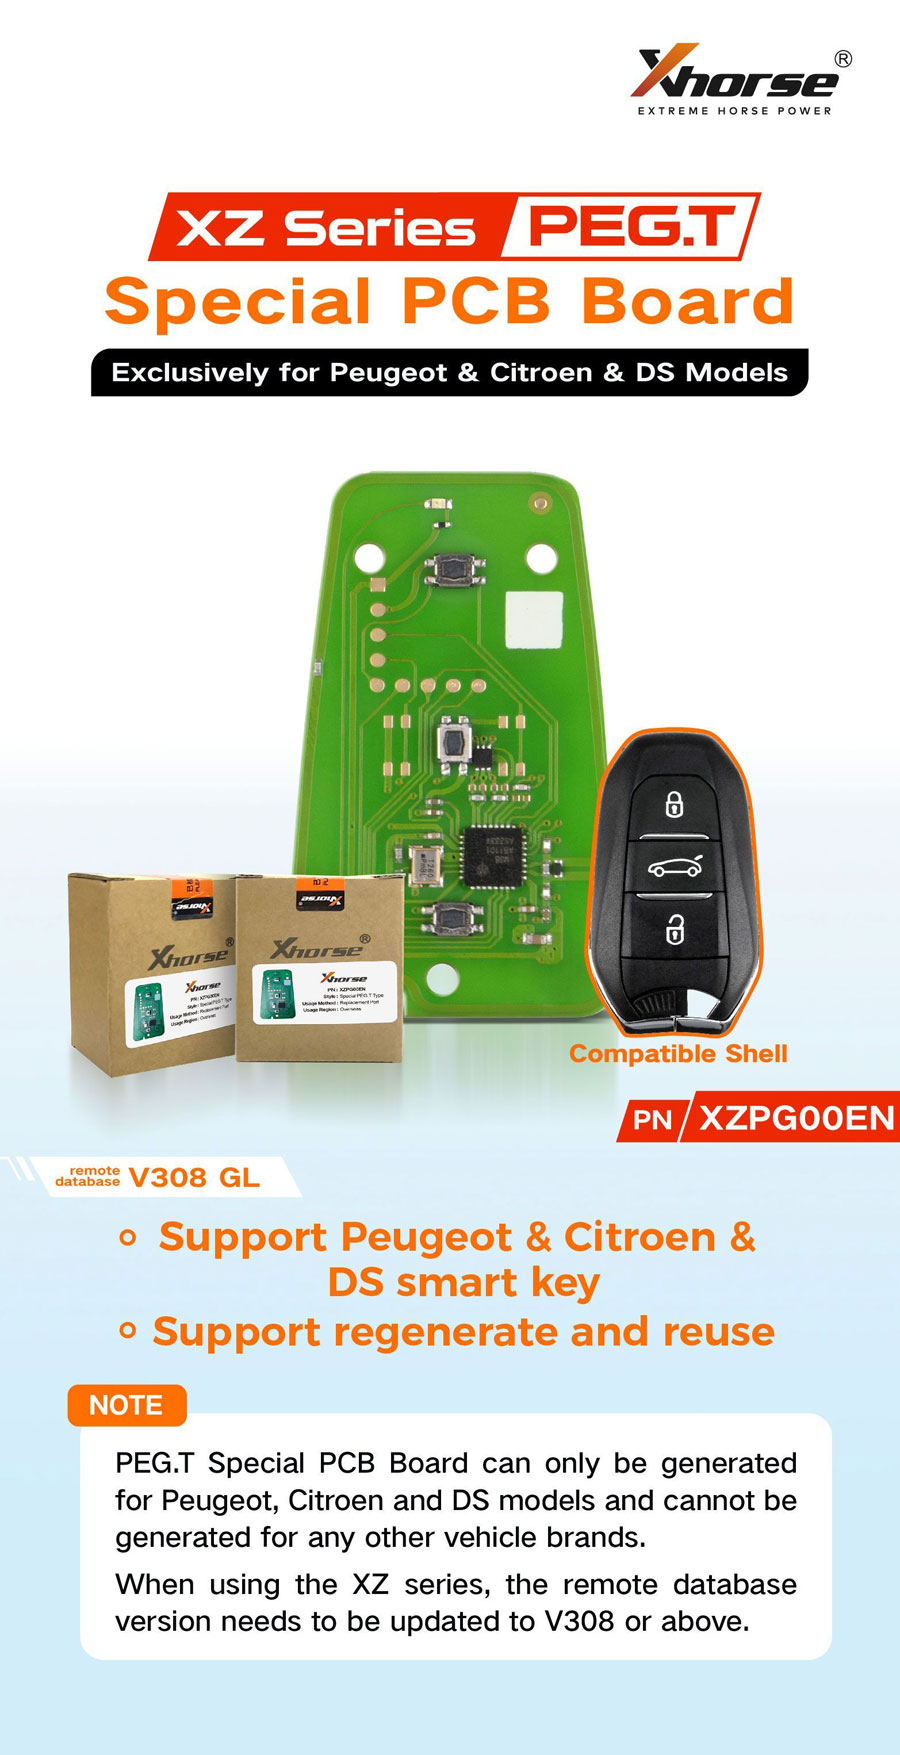 XHORSE XZPG00EN Special PCB Board Exclusively for Peugeot & Citroen & DS